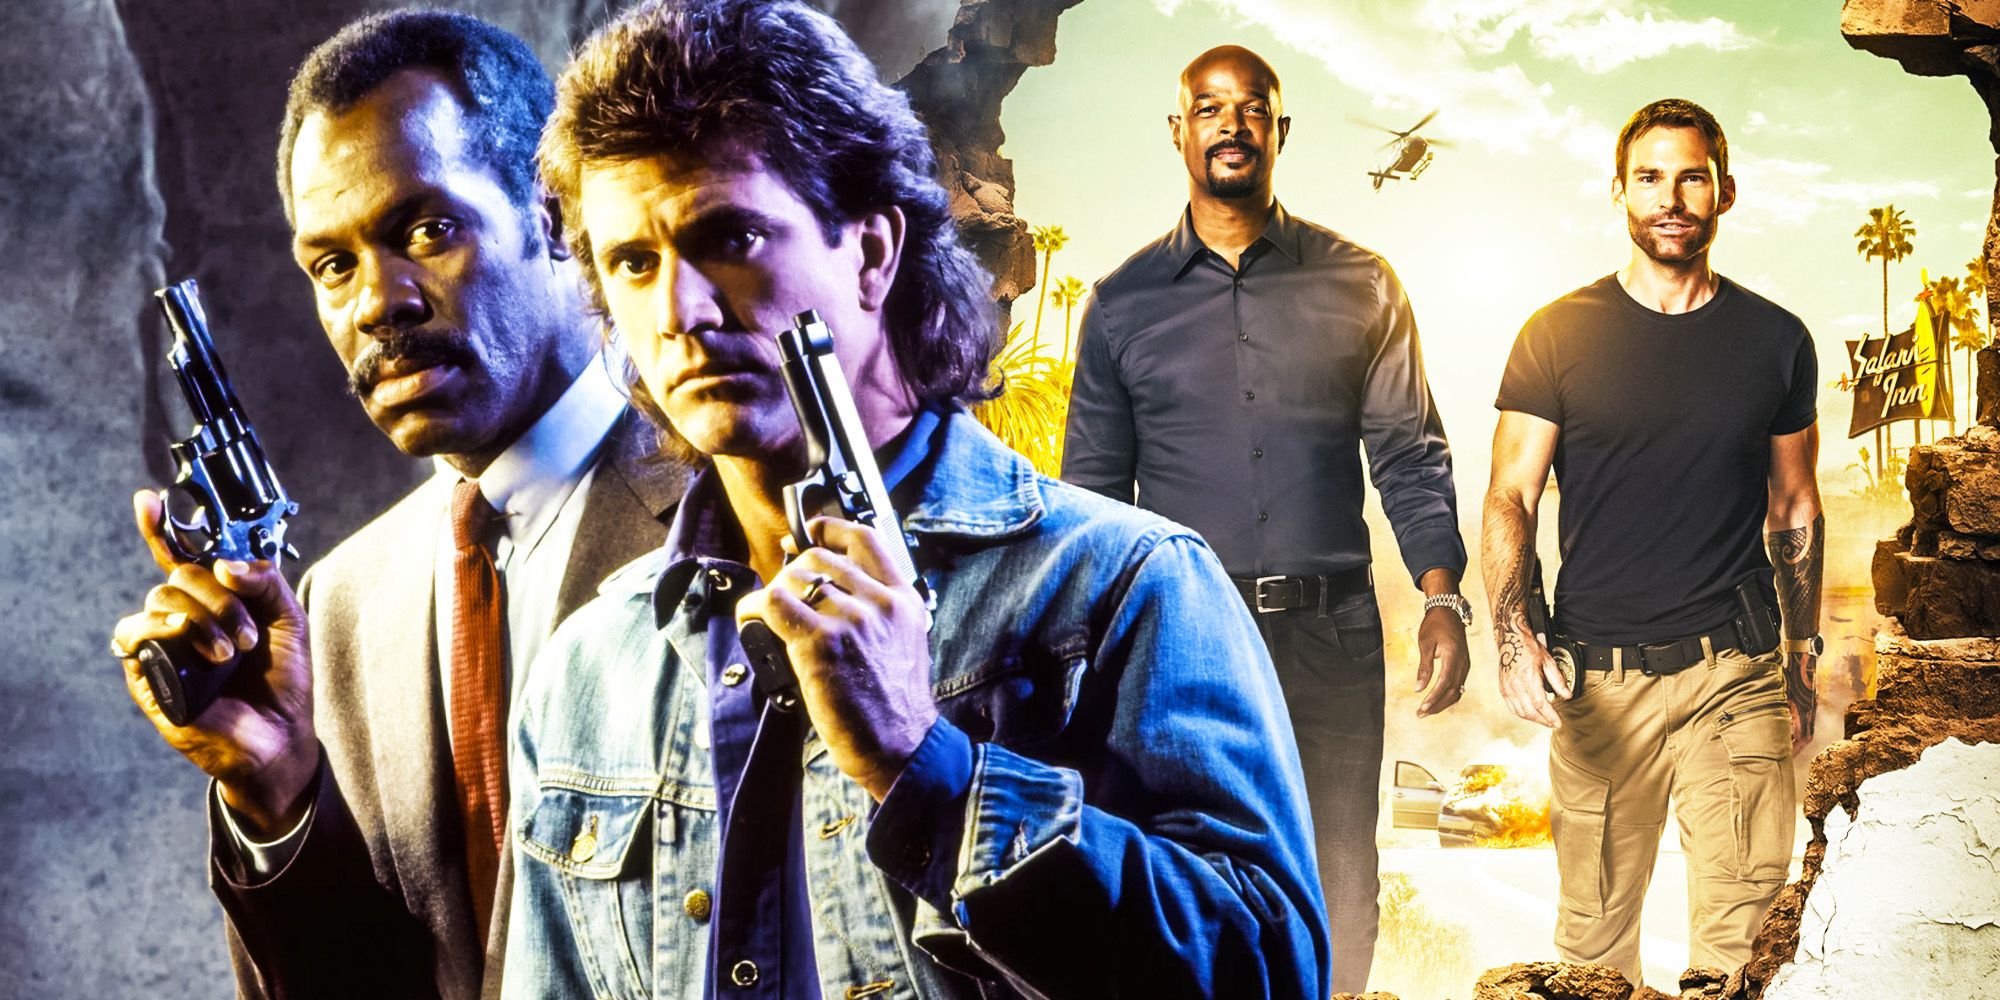 lethal weapon (tv series)